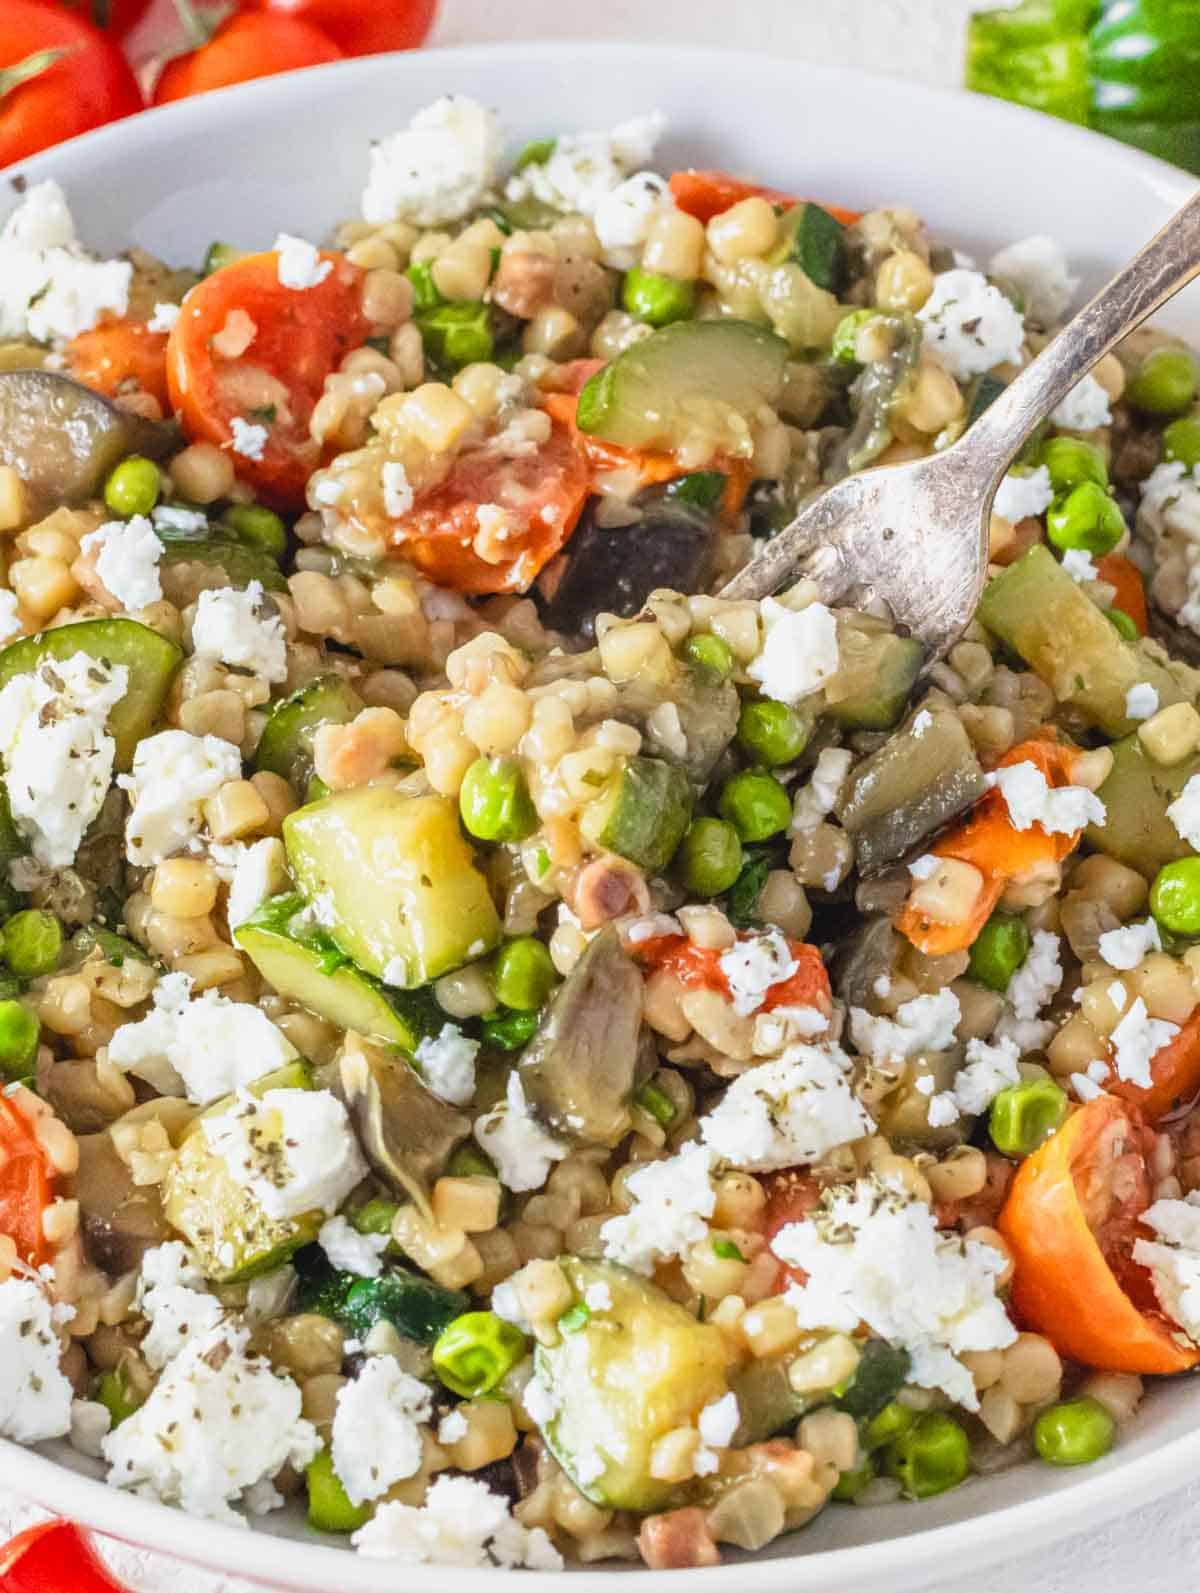 Creamy fregola with vegetables and a silver fork